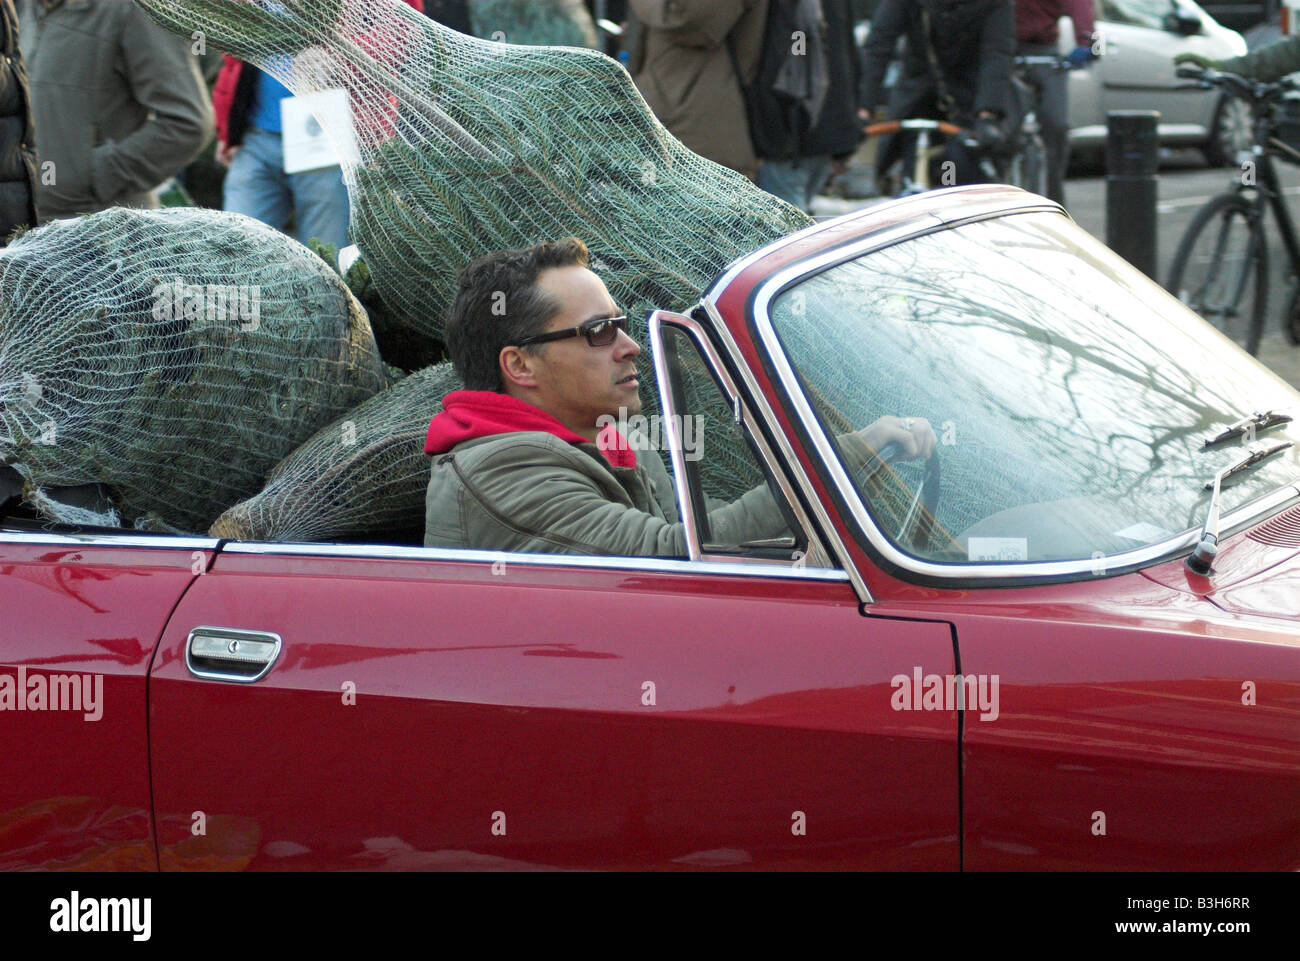 Italian Man in Alfa Romeo at Columbia Road Flower Market with Christmas Trees the Back of the car. Stock Photo